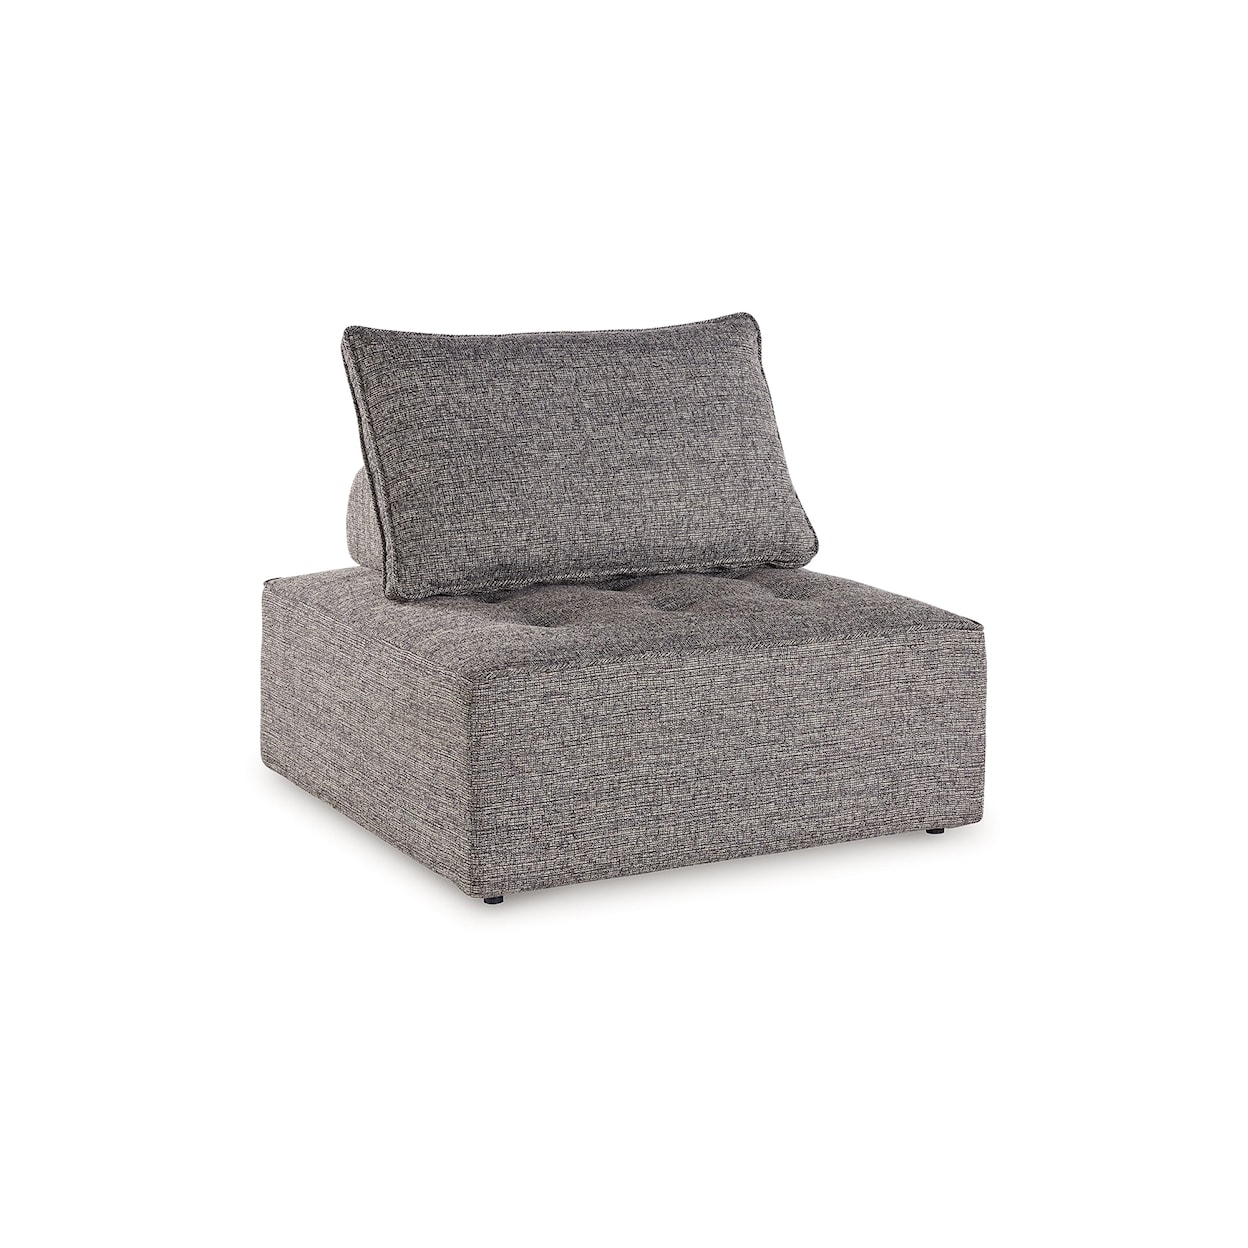 Signature Design Bree Zee Outdoor Lounge Chair w/Cushion